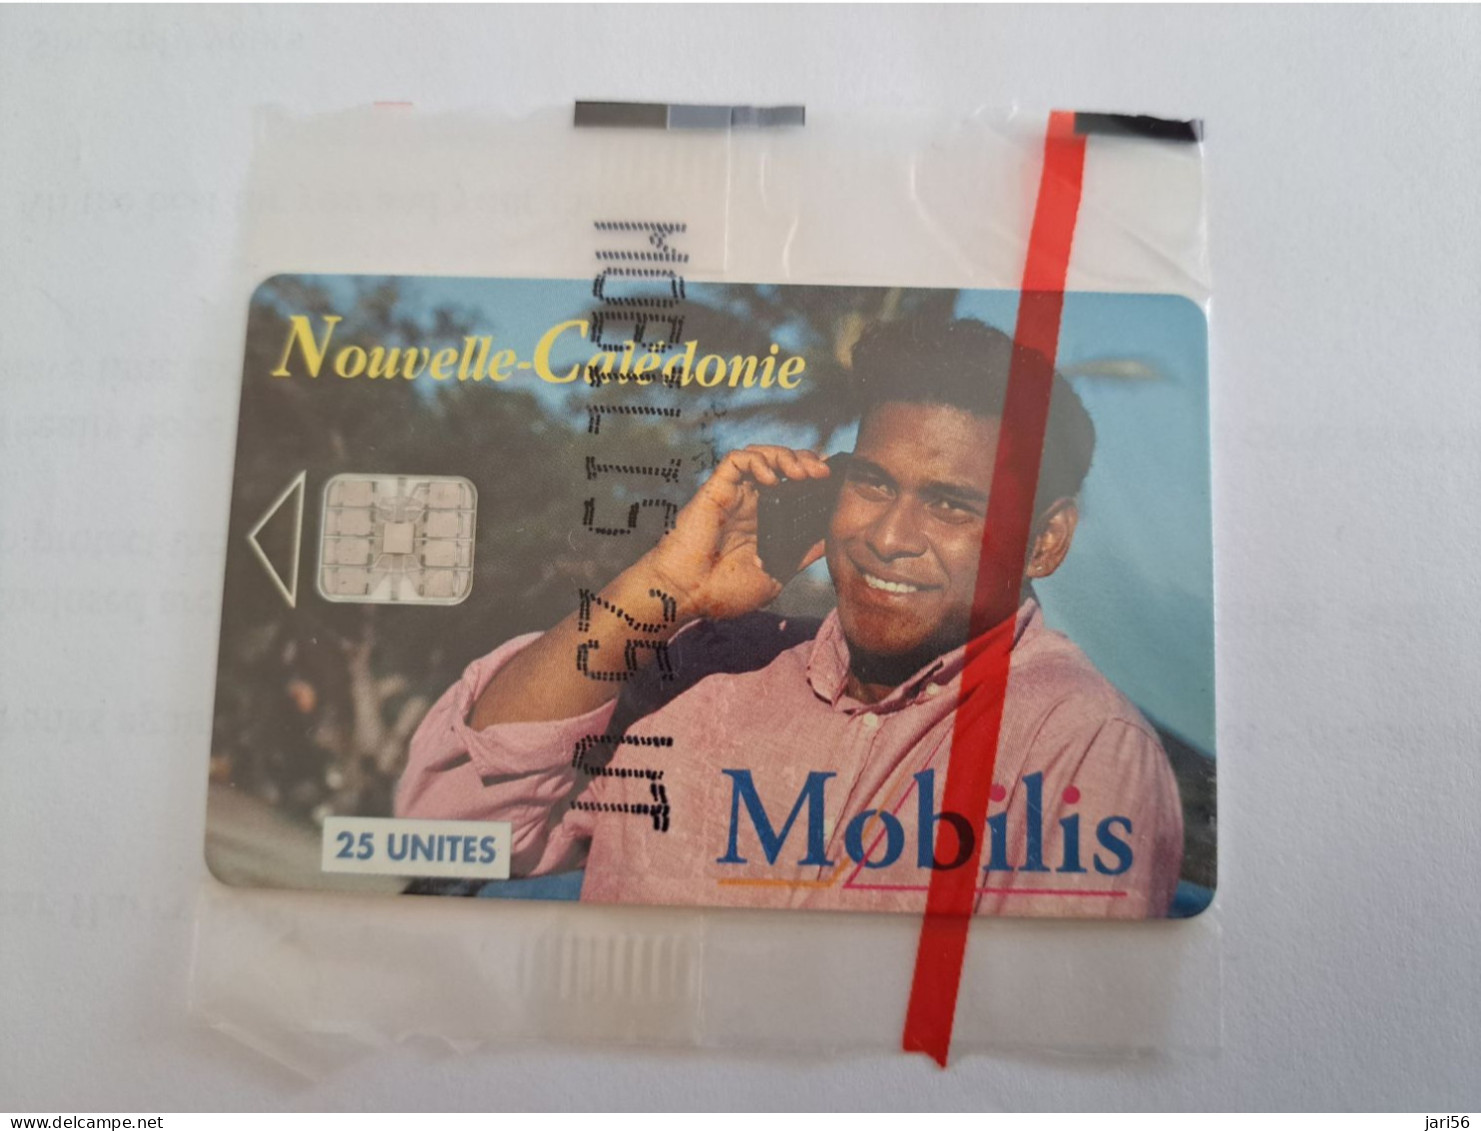 NOUVELLE CALEDONIA  CHIP CARD 25  UNITS / MAN ON THE PHONE /MOBILIS   / MINT IN WRAPPER  ** 13546 ** - Nuova Caledonia